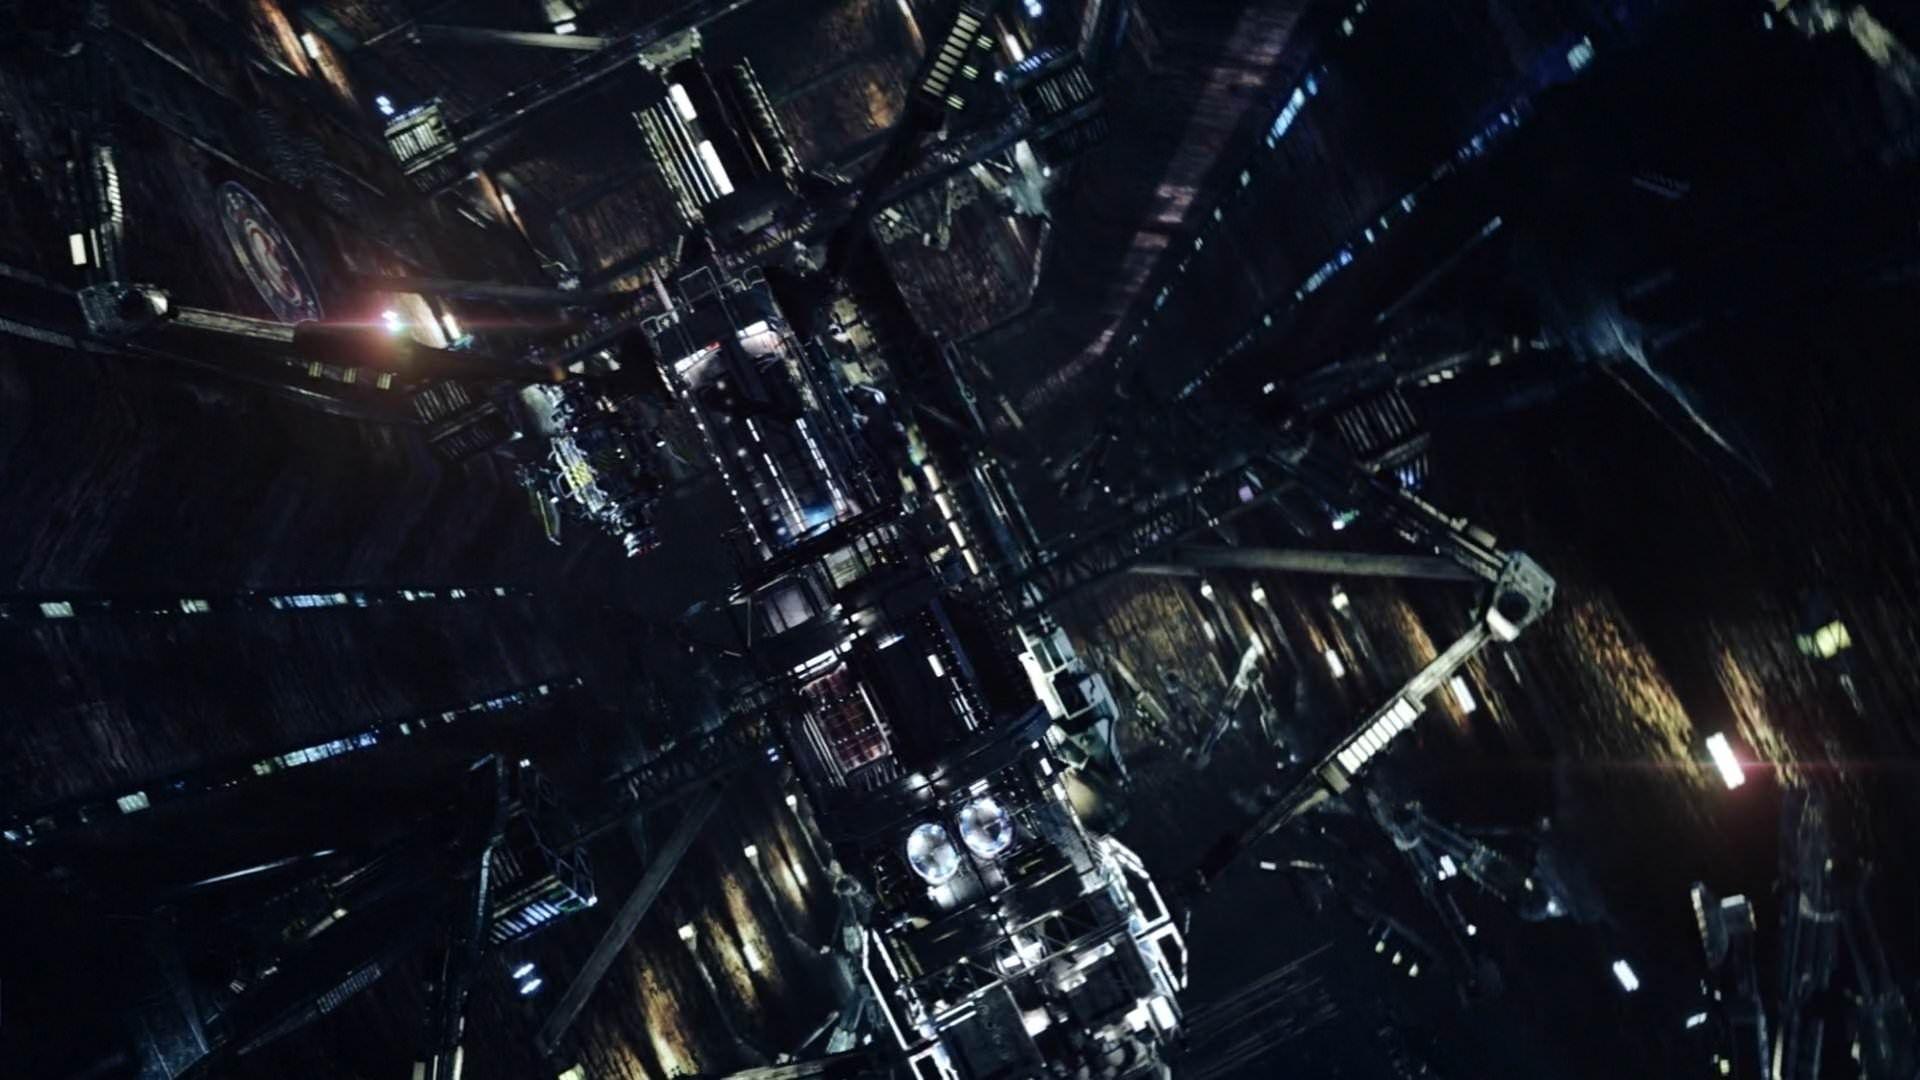 The expanse 1080P 2K 4K 5K HD wallpapers free download  Wallpaper Flare